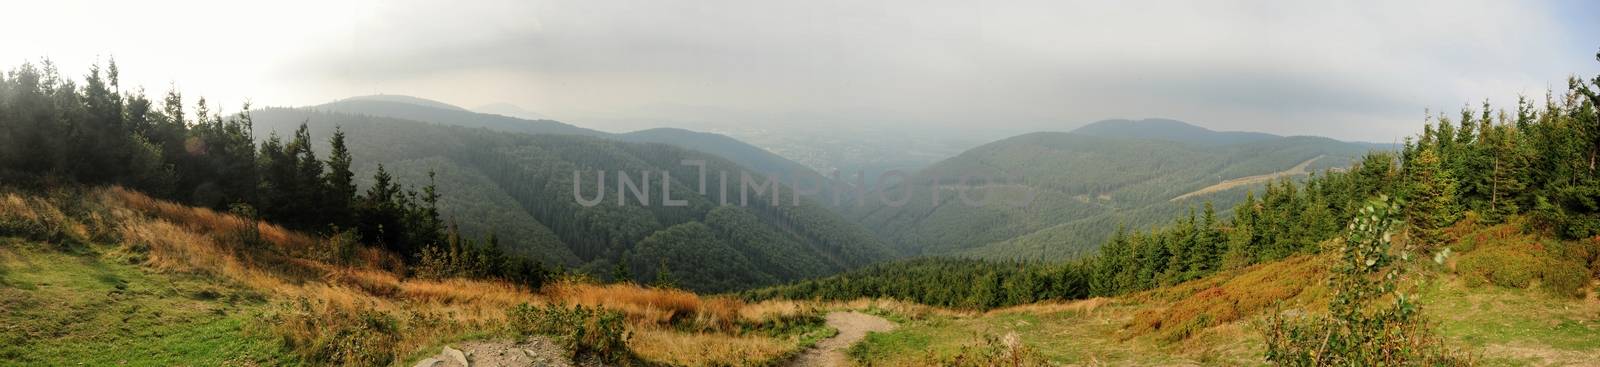 Panorama of beautiful green landscapes in the mist and rain